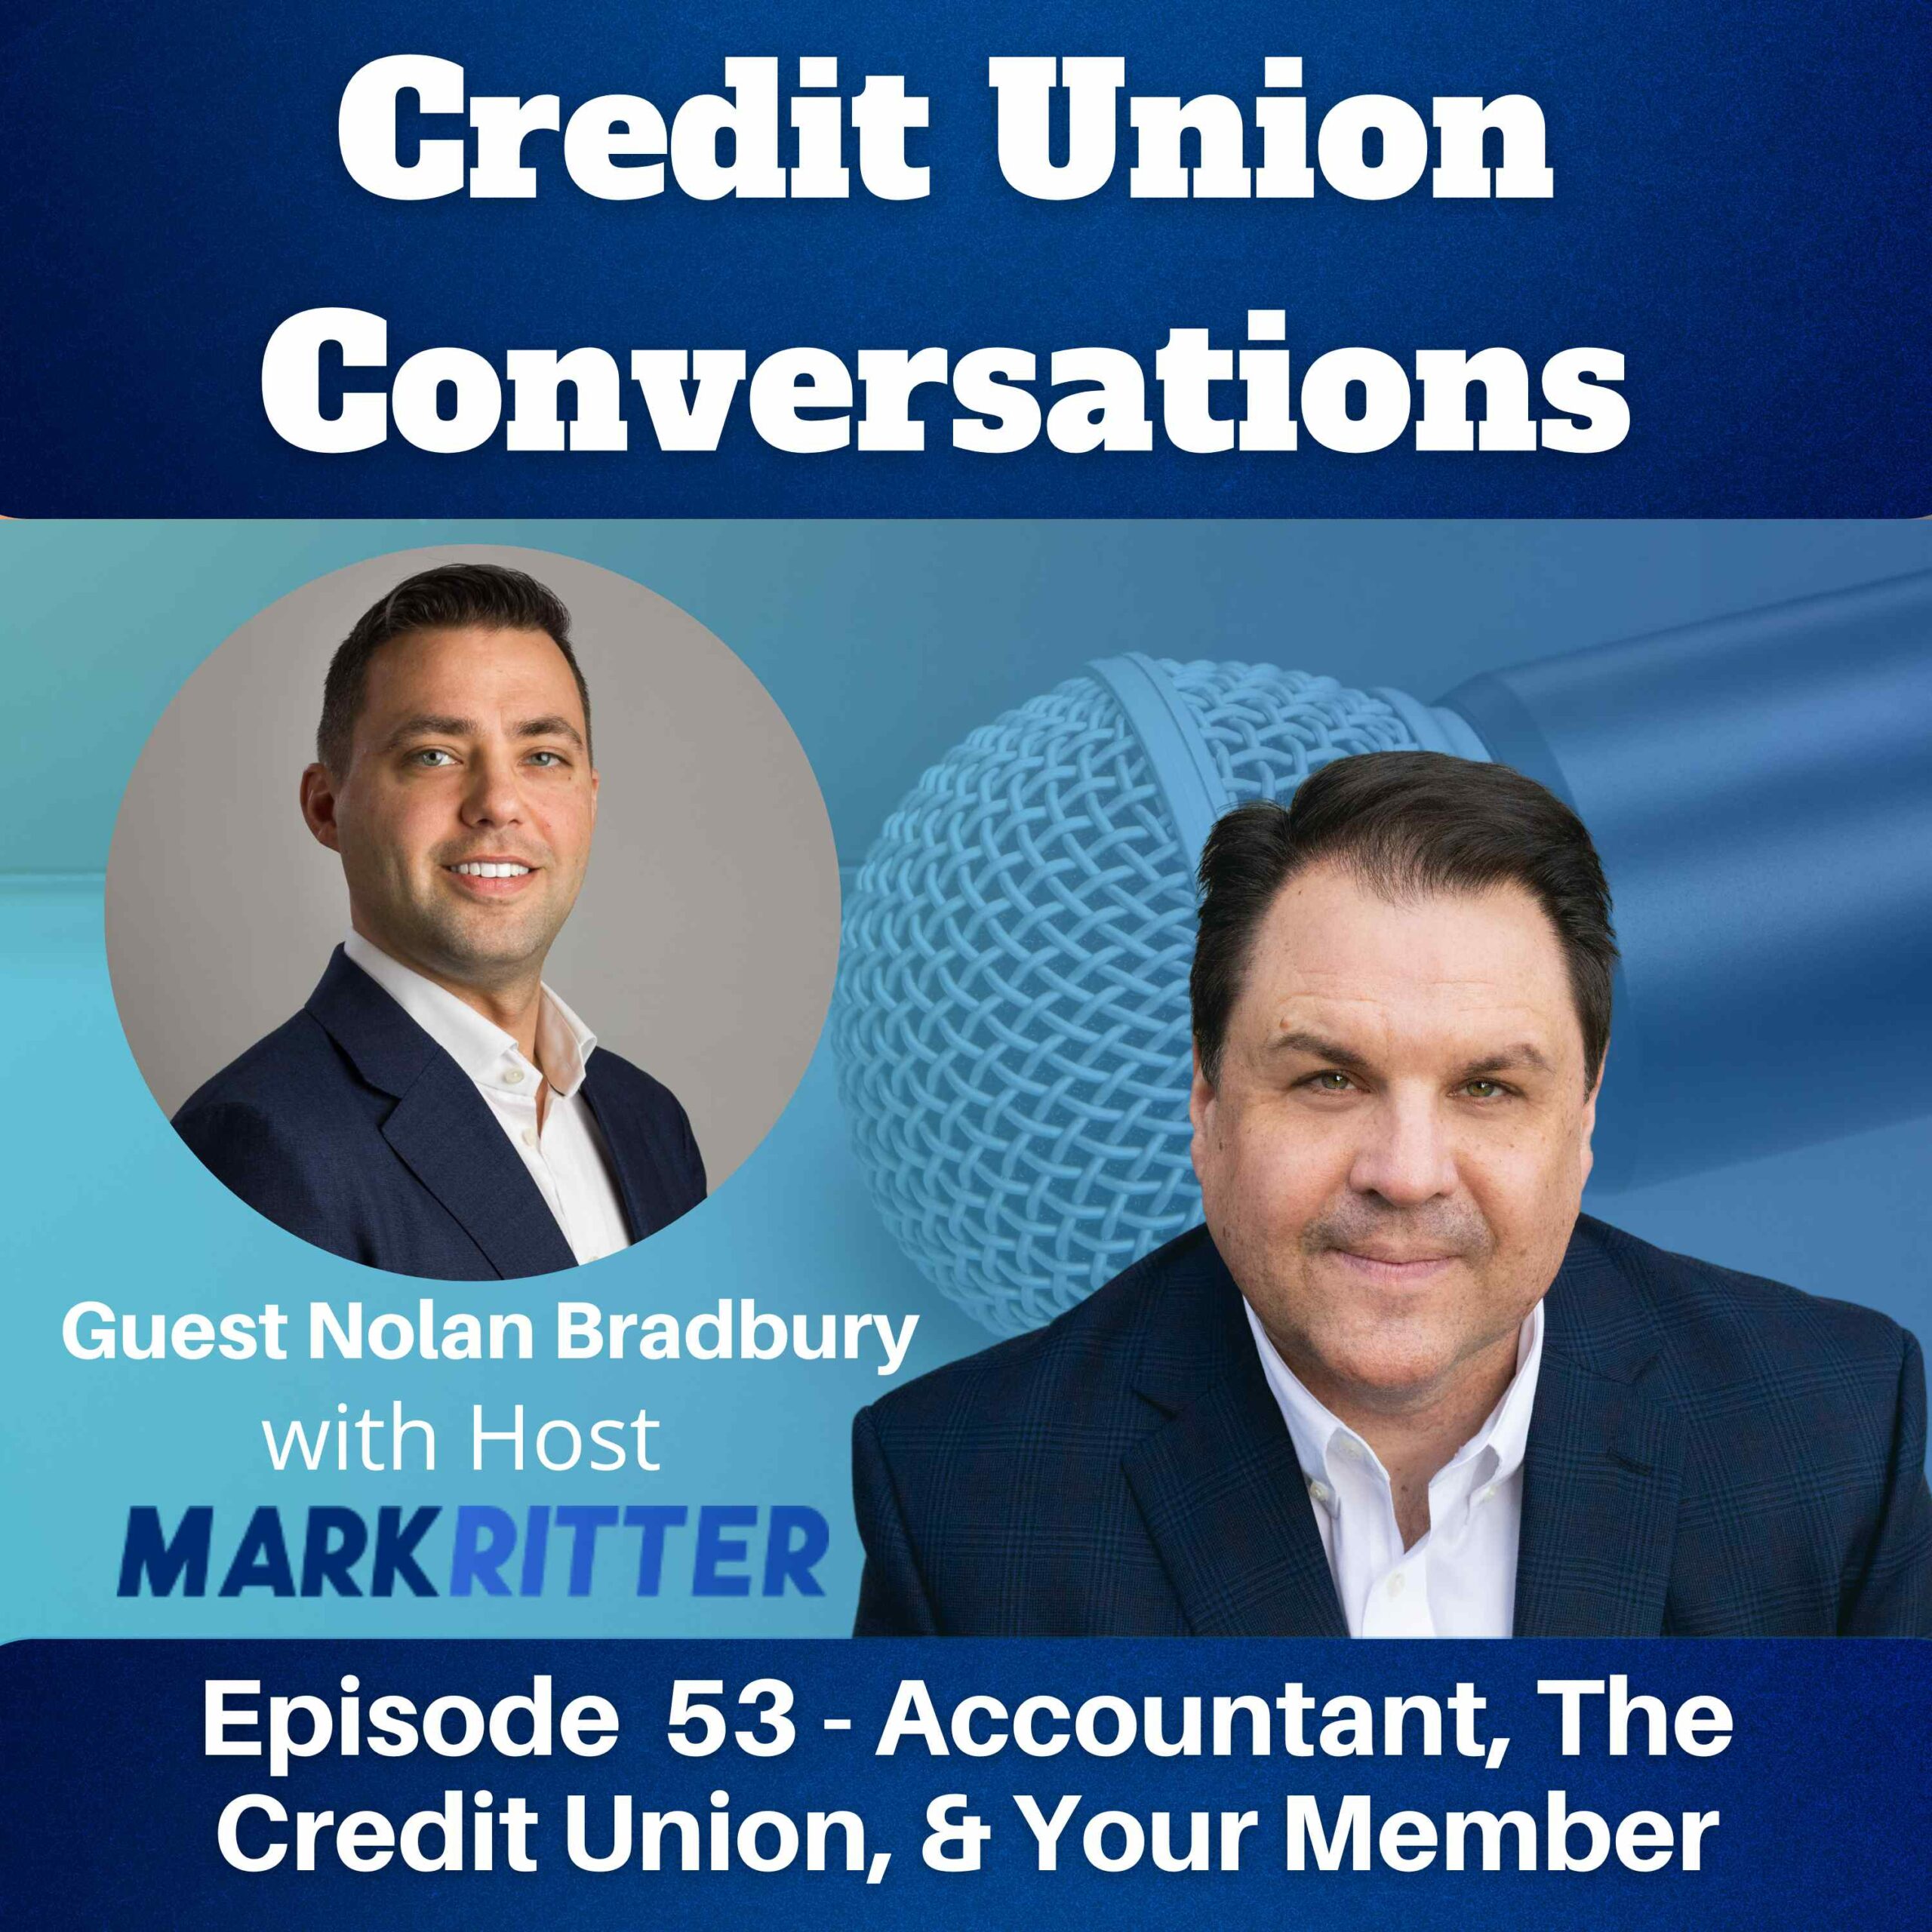 Accountant, The Credit Union, & Your Member